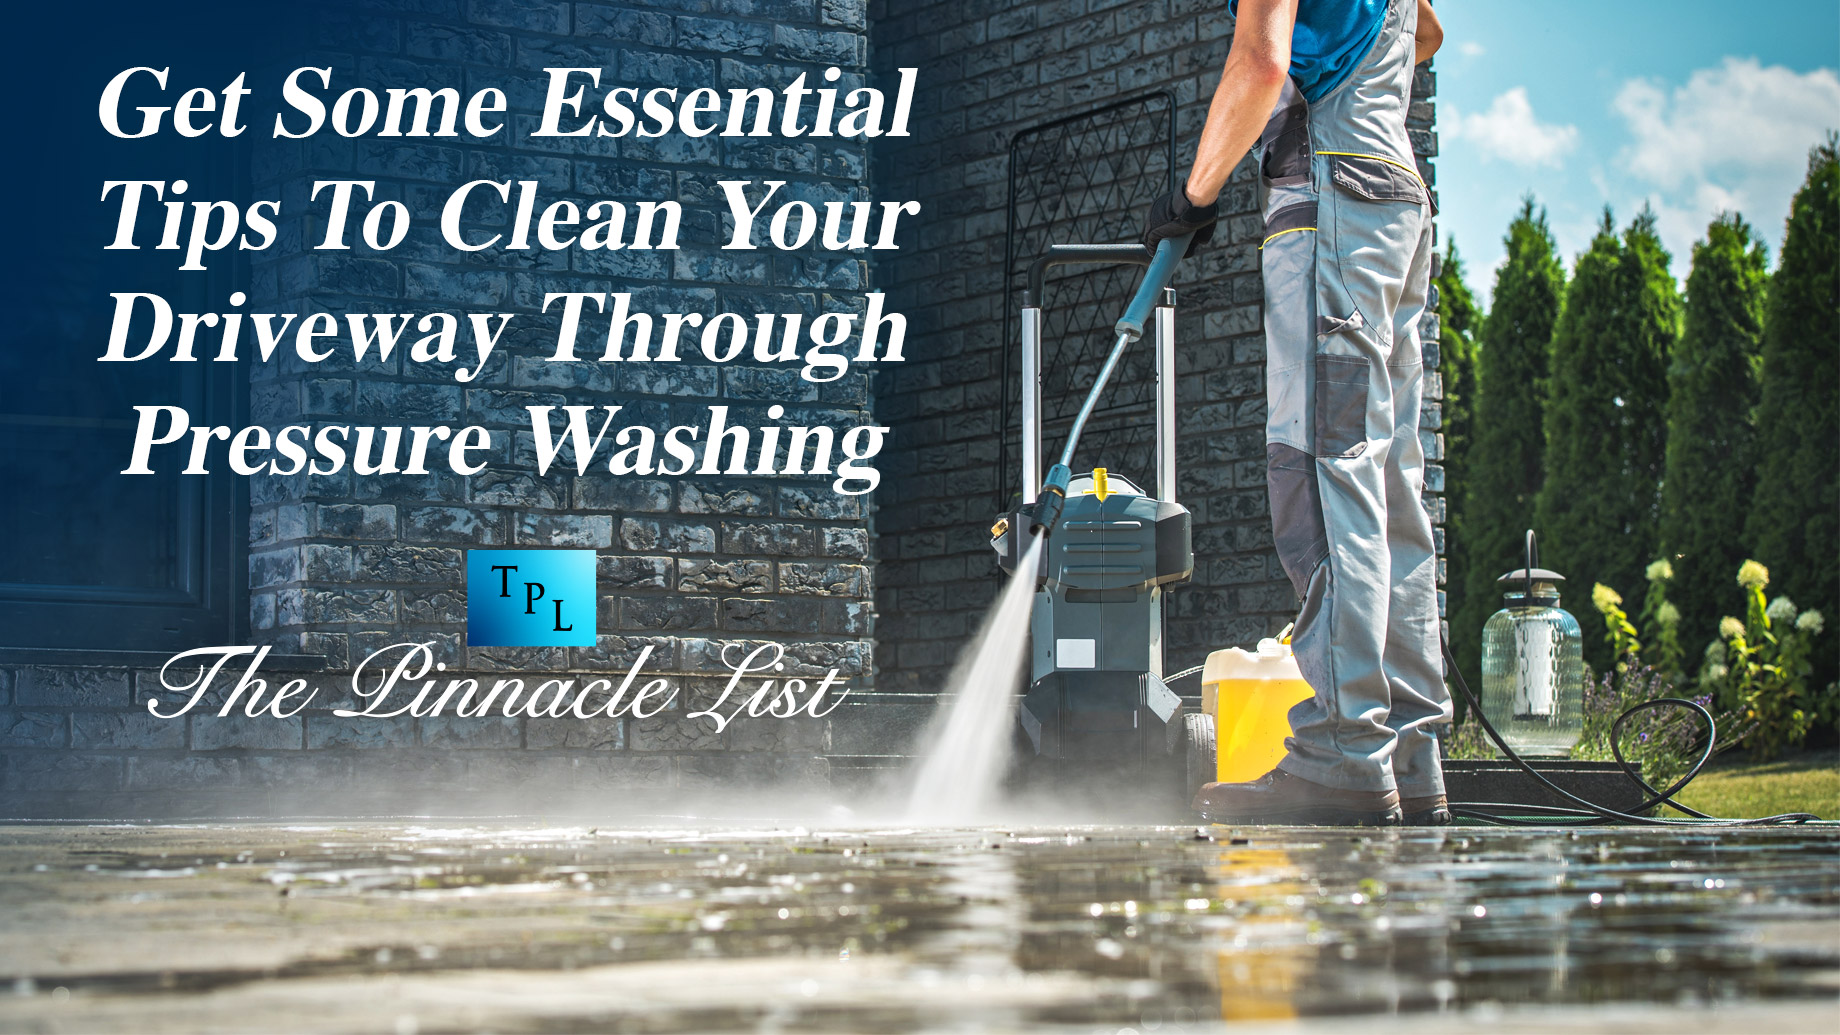 Get Some Essential Tips To Clean Your Driveway Through Pressure Washing